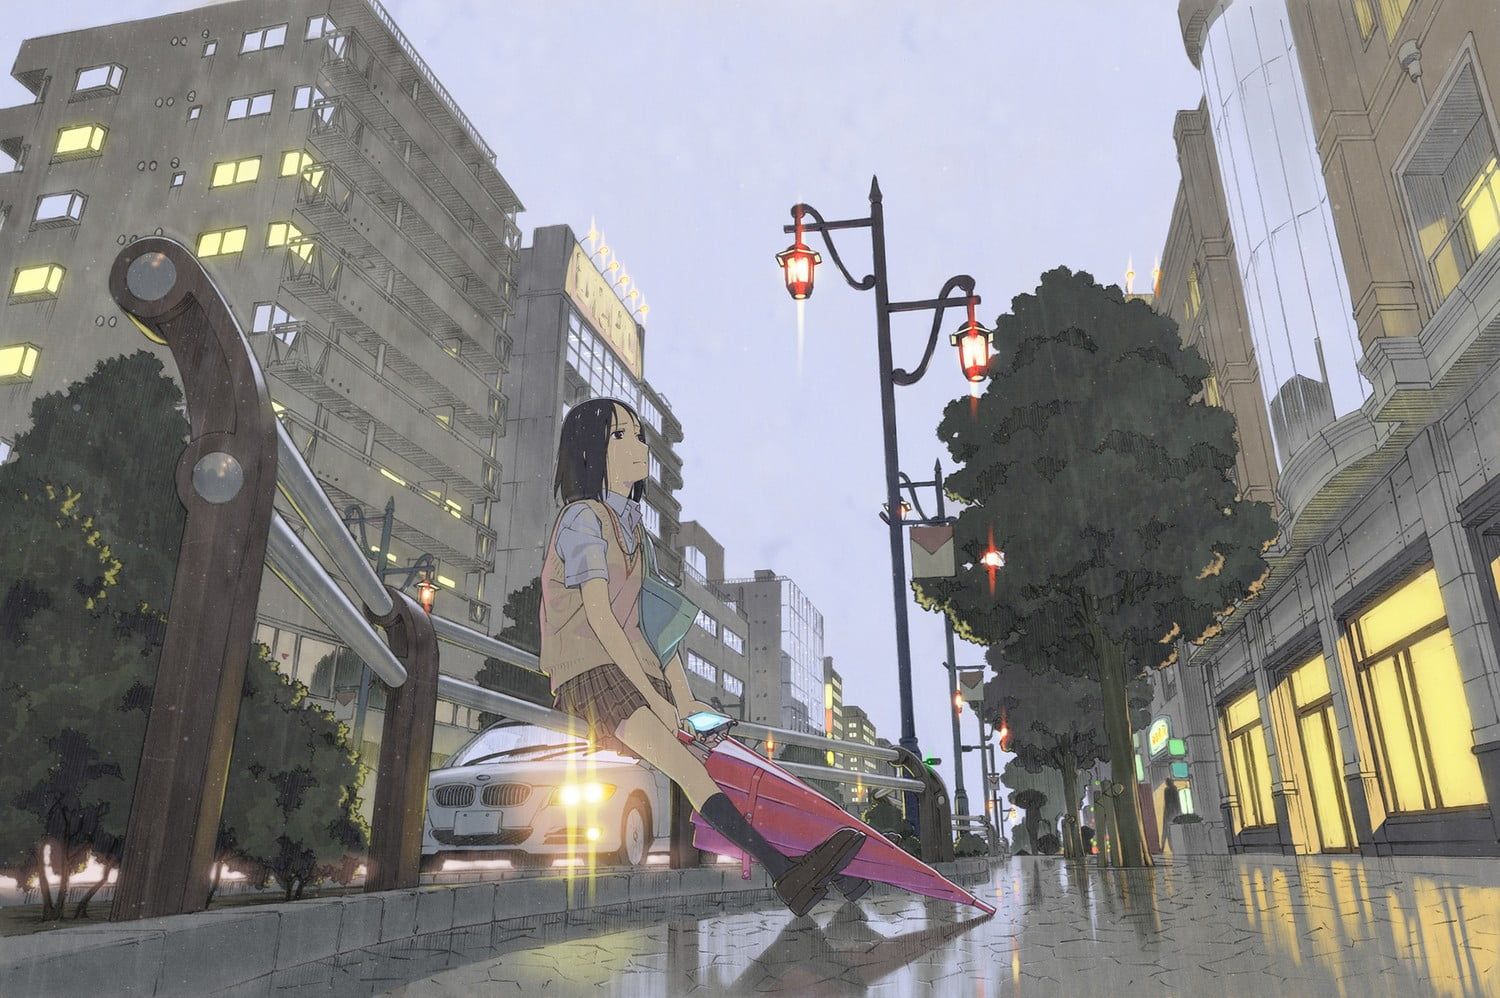 Anime Girl With Umbrella In Rain Wallpapers